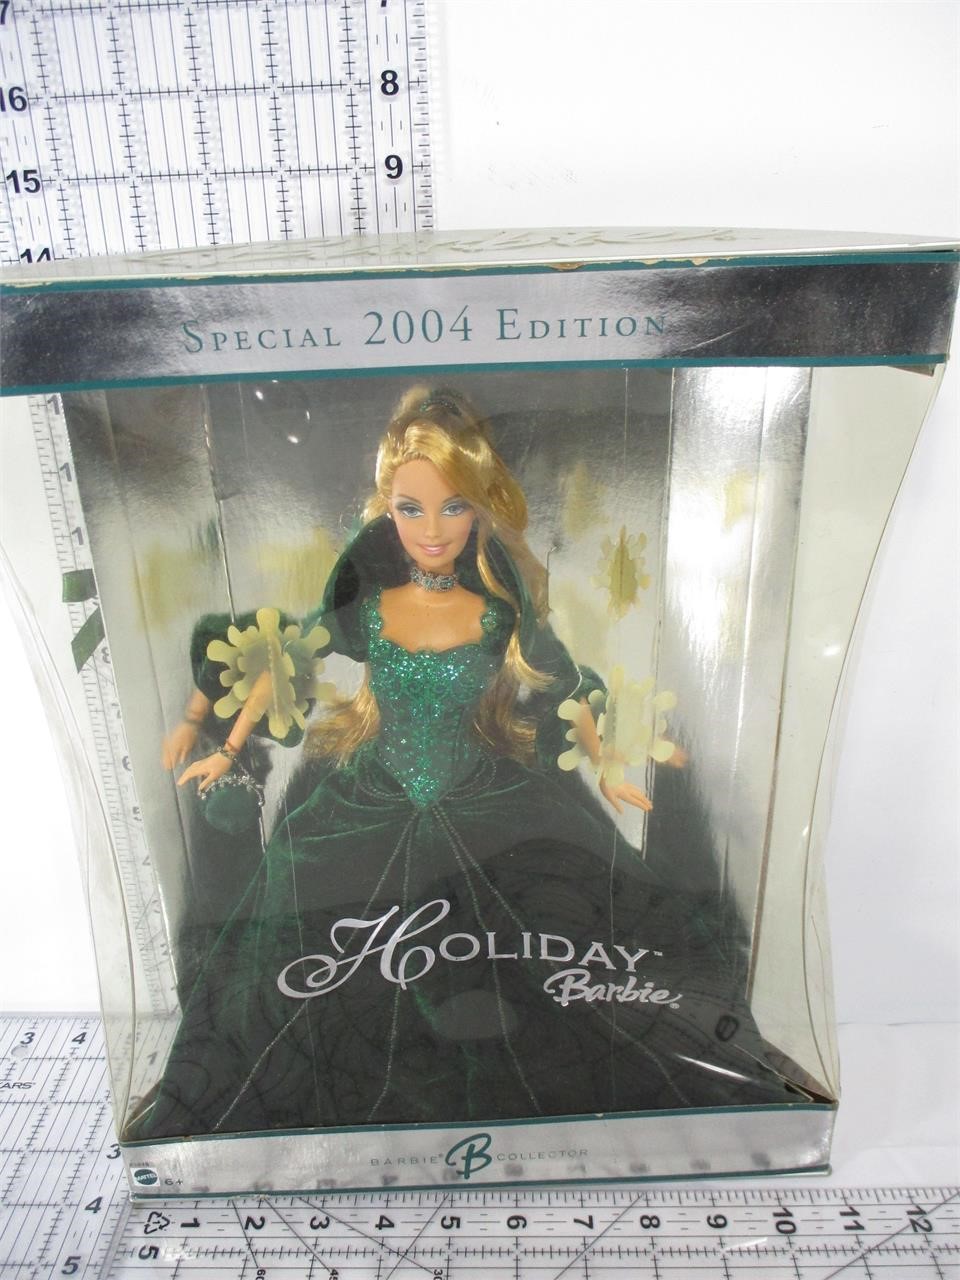 2004 Special Edition Holiday Barbie Doll